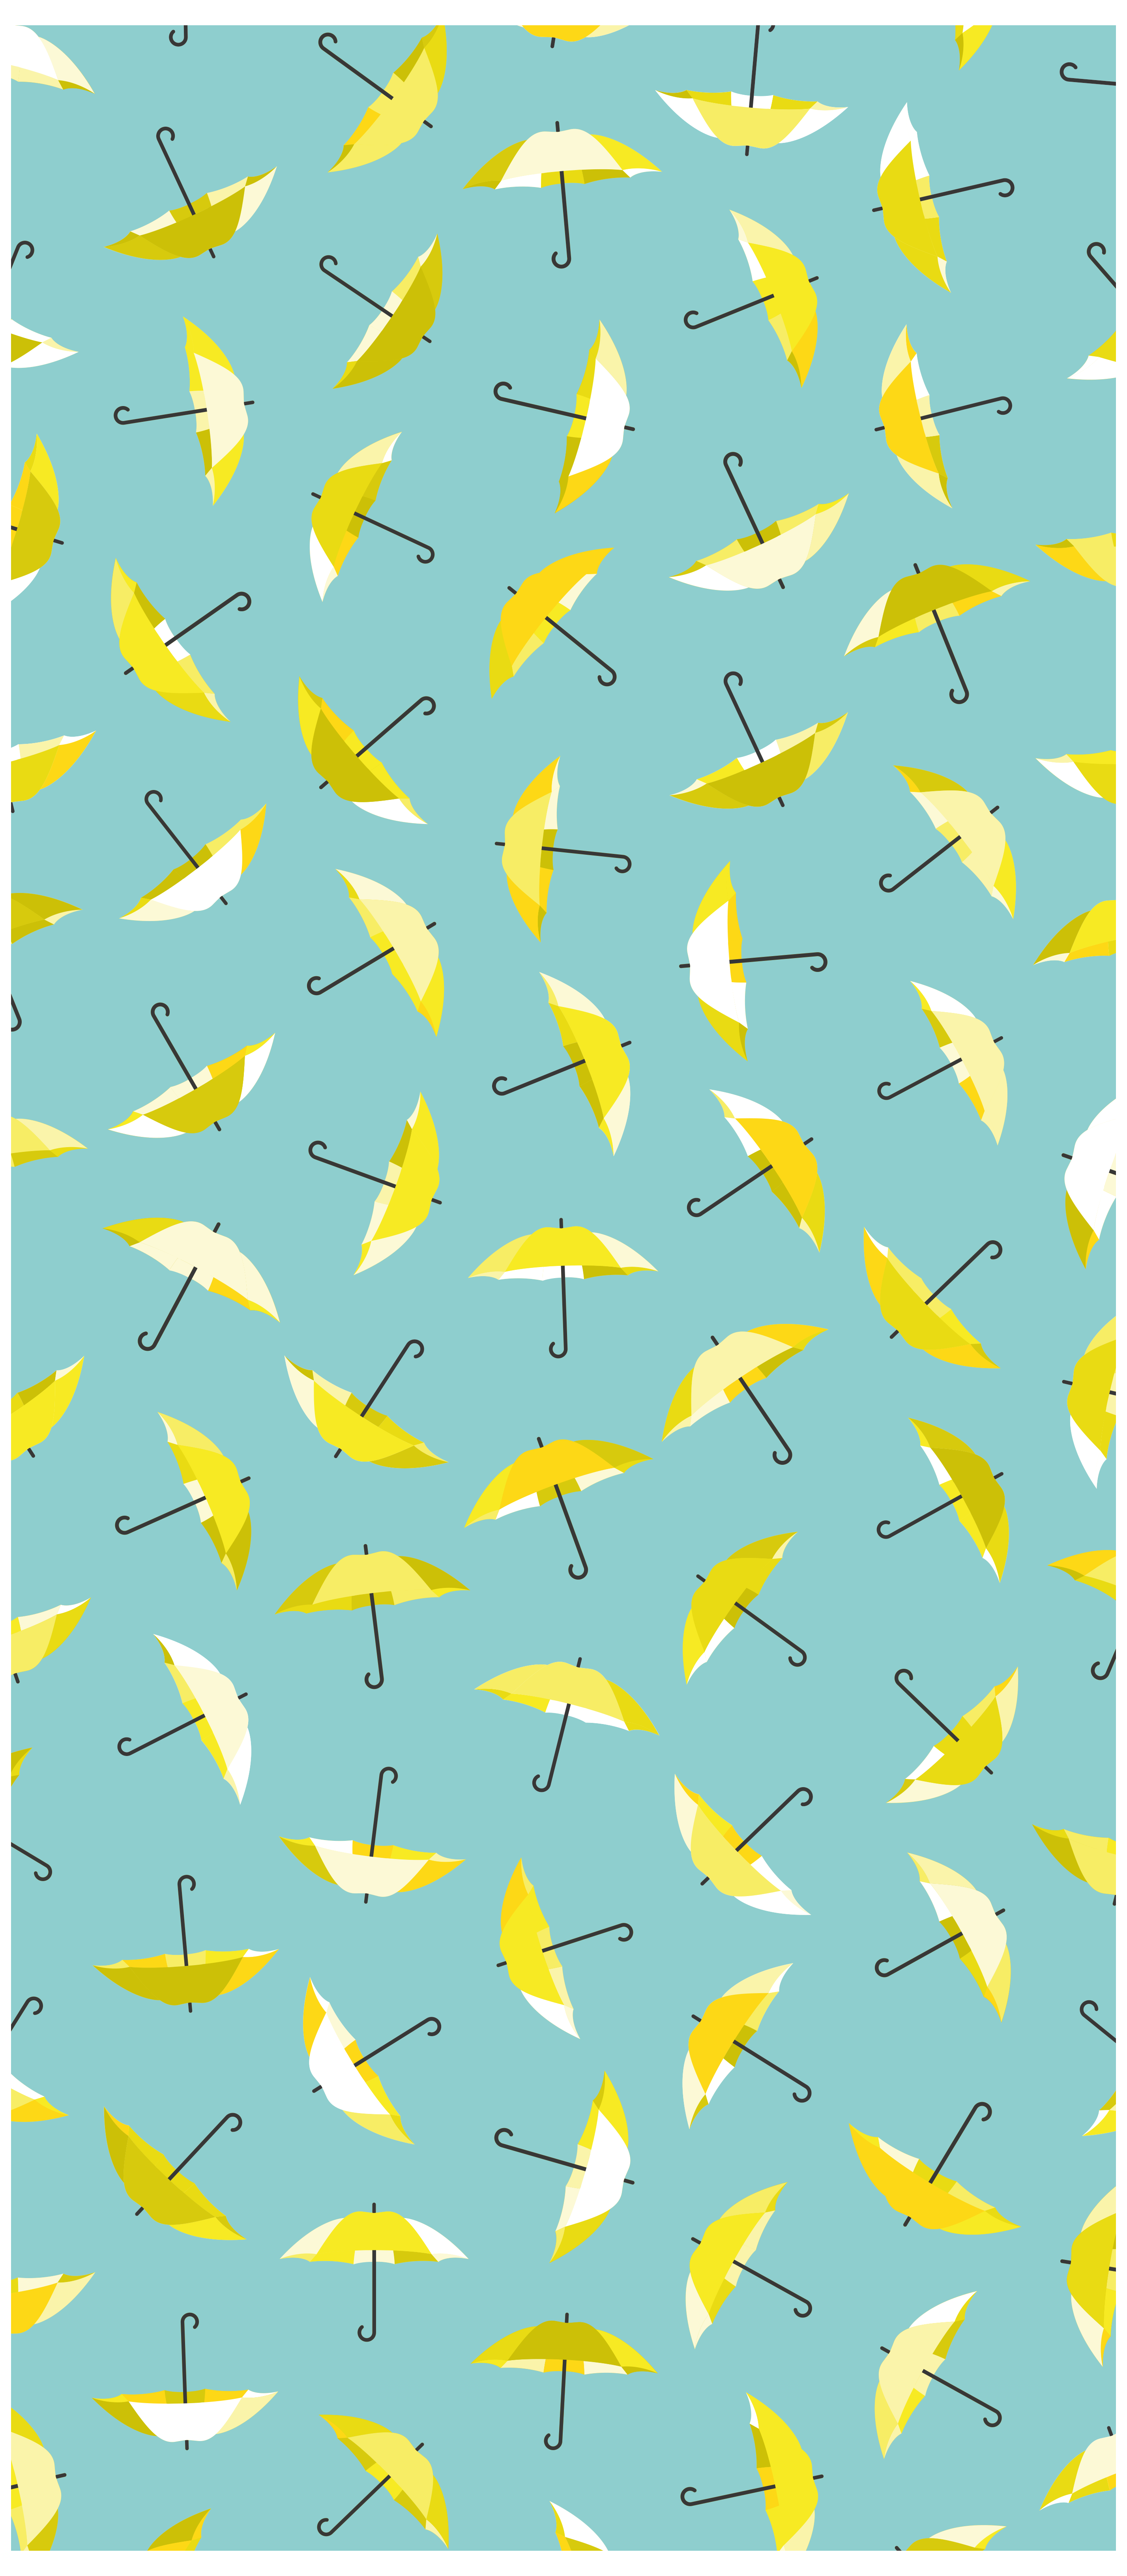 Right Place' Pattern #yellow #umbrella #wallpaper #yellowumbrellawallpaper. iPhone wallpaper, Pattern illustration, Repeating pattern design